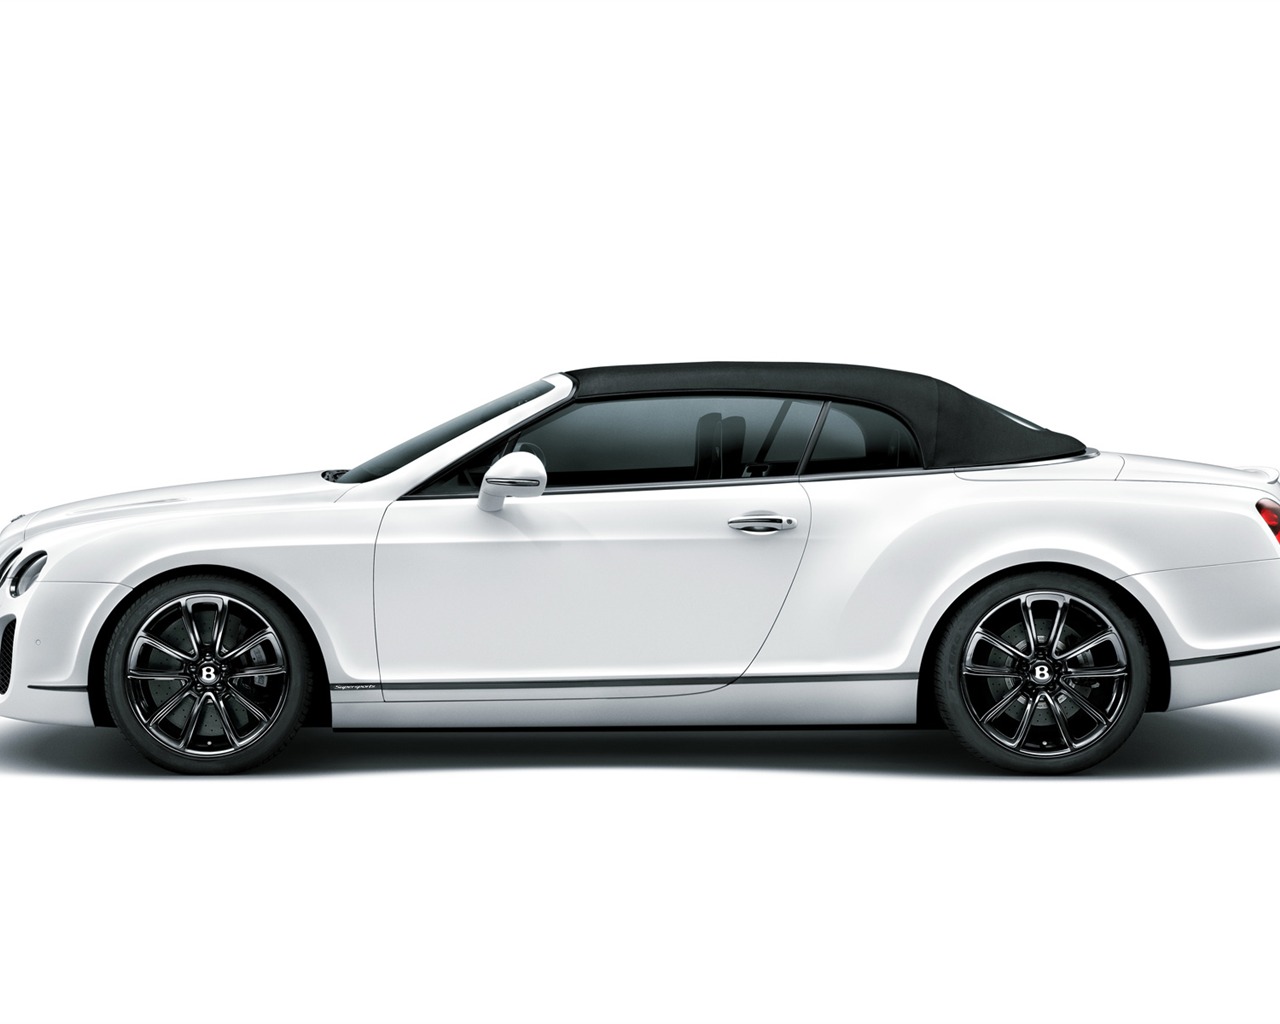 Bentley Continental Supersports Convertible - 2010 宾利51 - 1280x1024